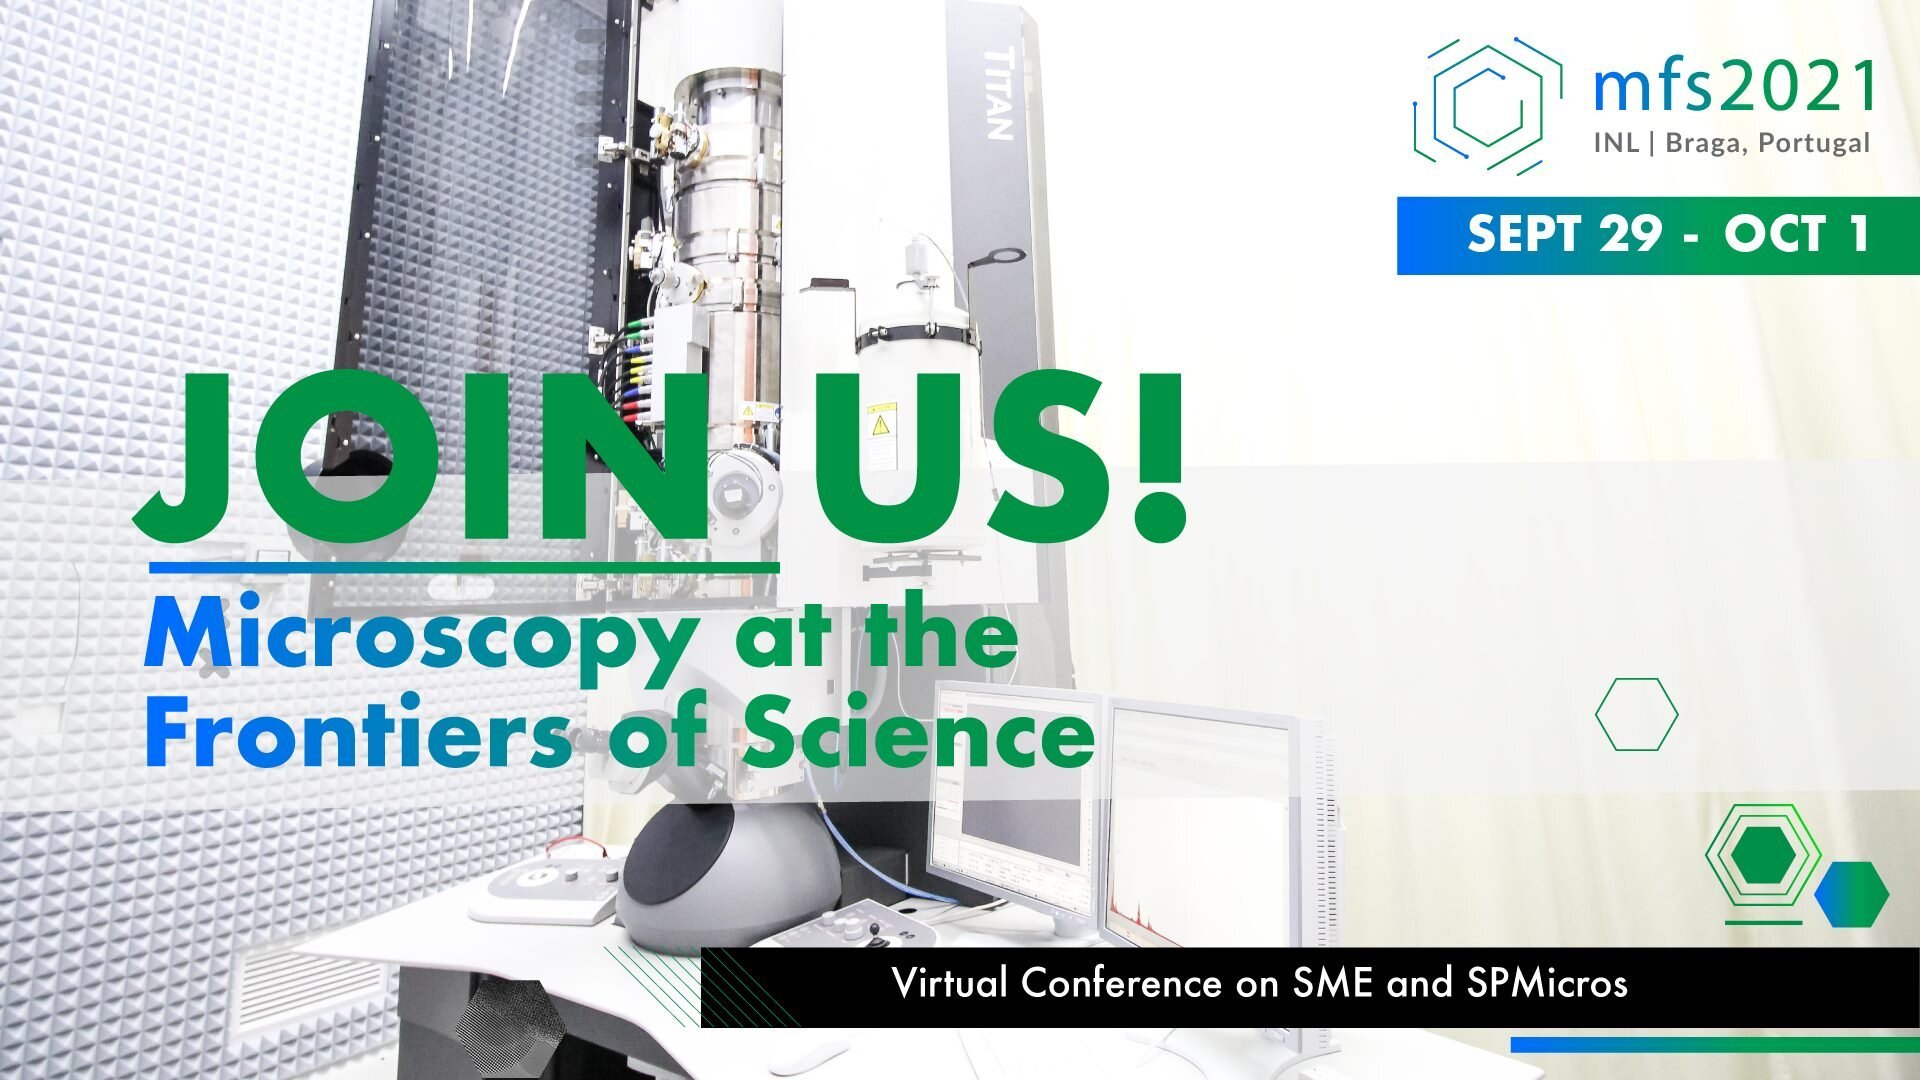 Virtual Conference Microscopy at the Frontiers of Science 2021 coming your way!